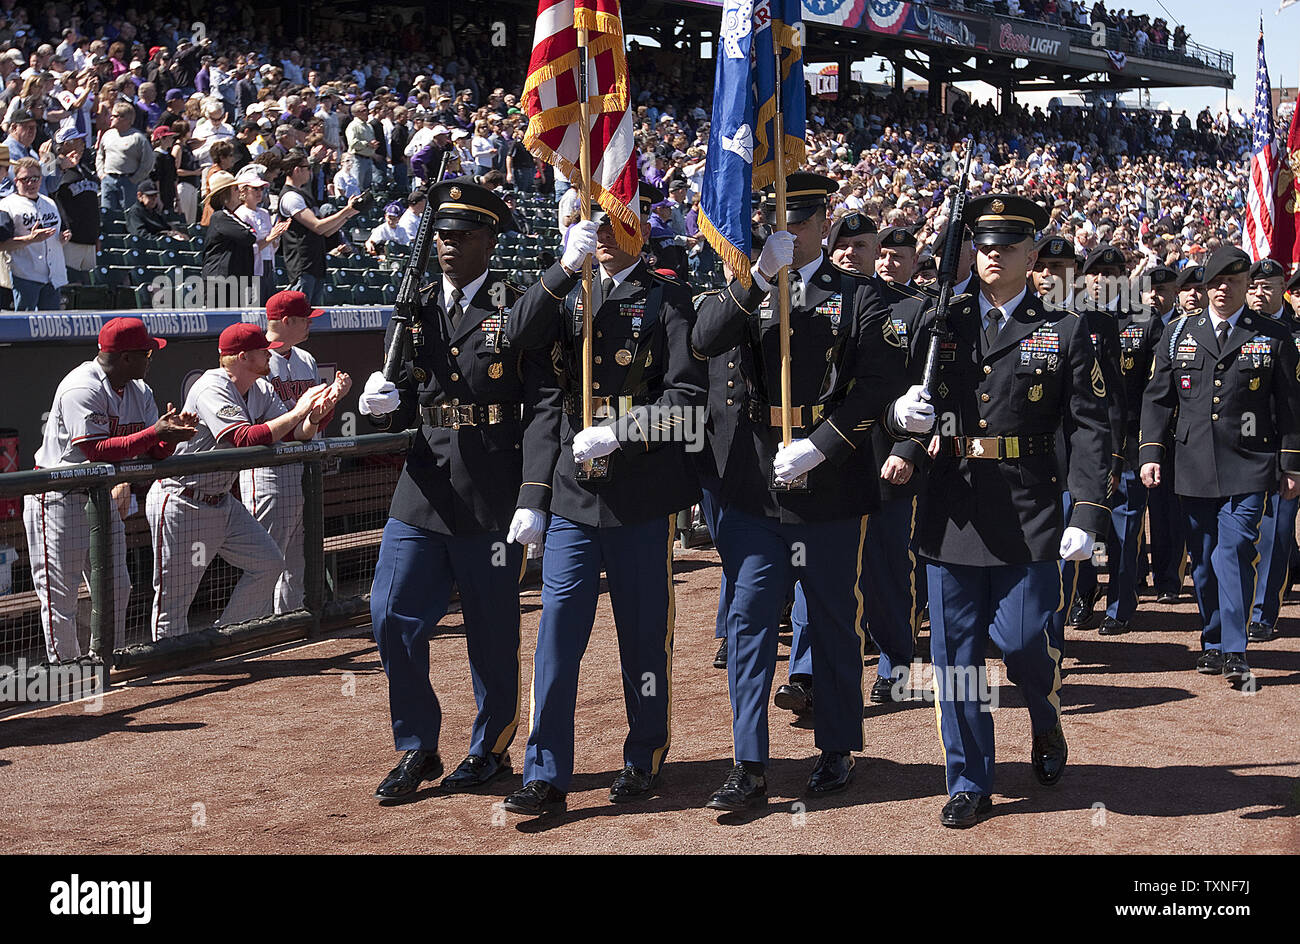 A military parade with the US Army, US Air Force, US Navy, and the US Marines started pre-game ceremonies at Coors Field on Opening Day in Denver on April 1, 2011.  A moment of silence was held for the victims of the Japanese tsunami disaster.     UPI/Gary C. Caskey Stock Photo